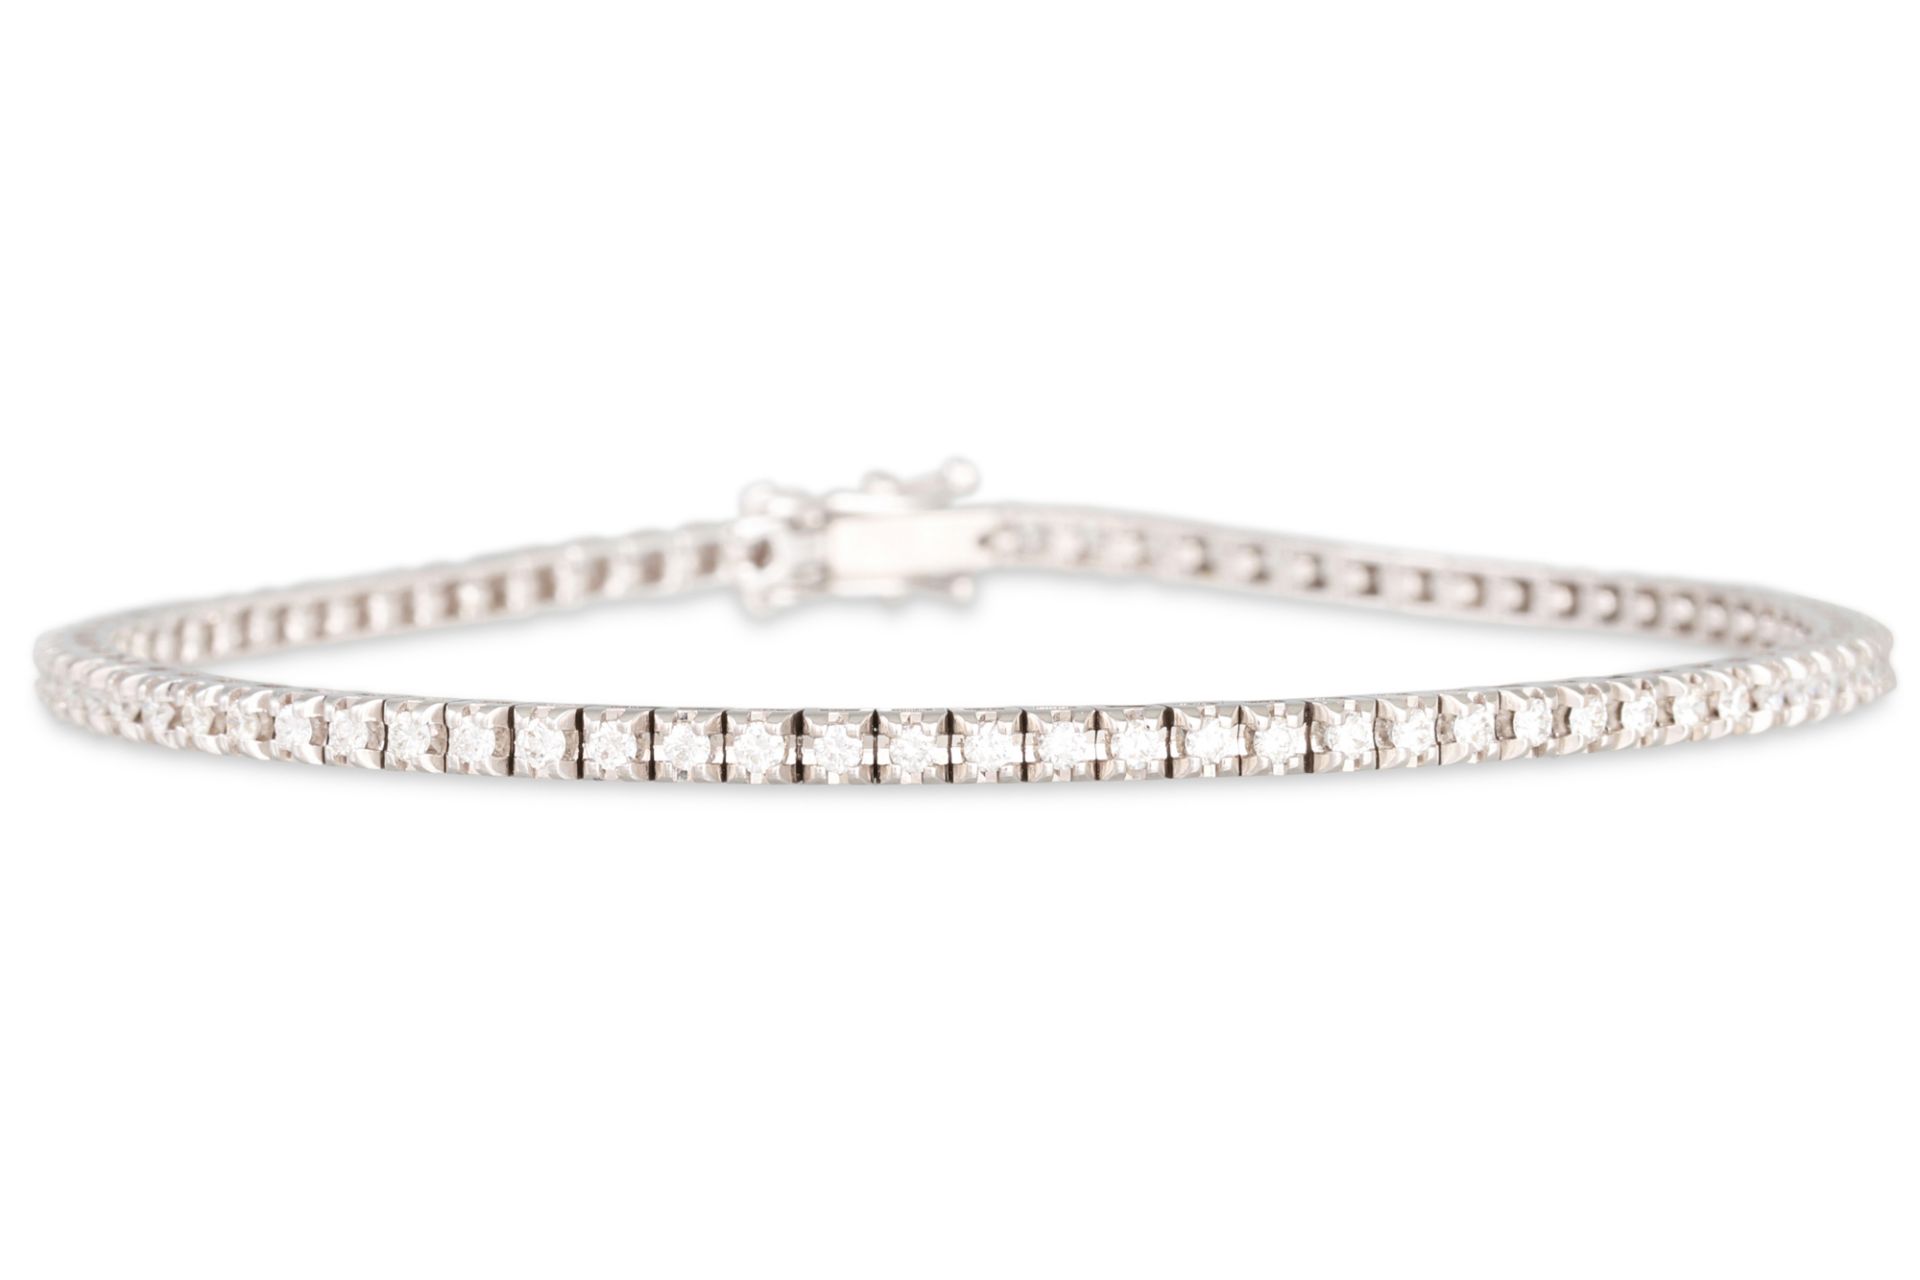 A DIAMOND LINE BRACELET, mounted in 18ct white gold. Together with a HRD Cert stating the diamonds